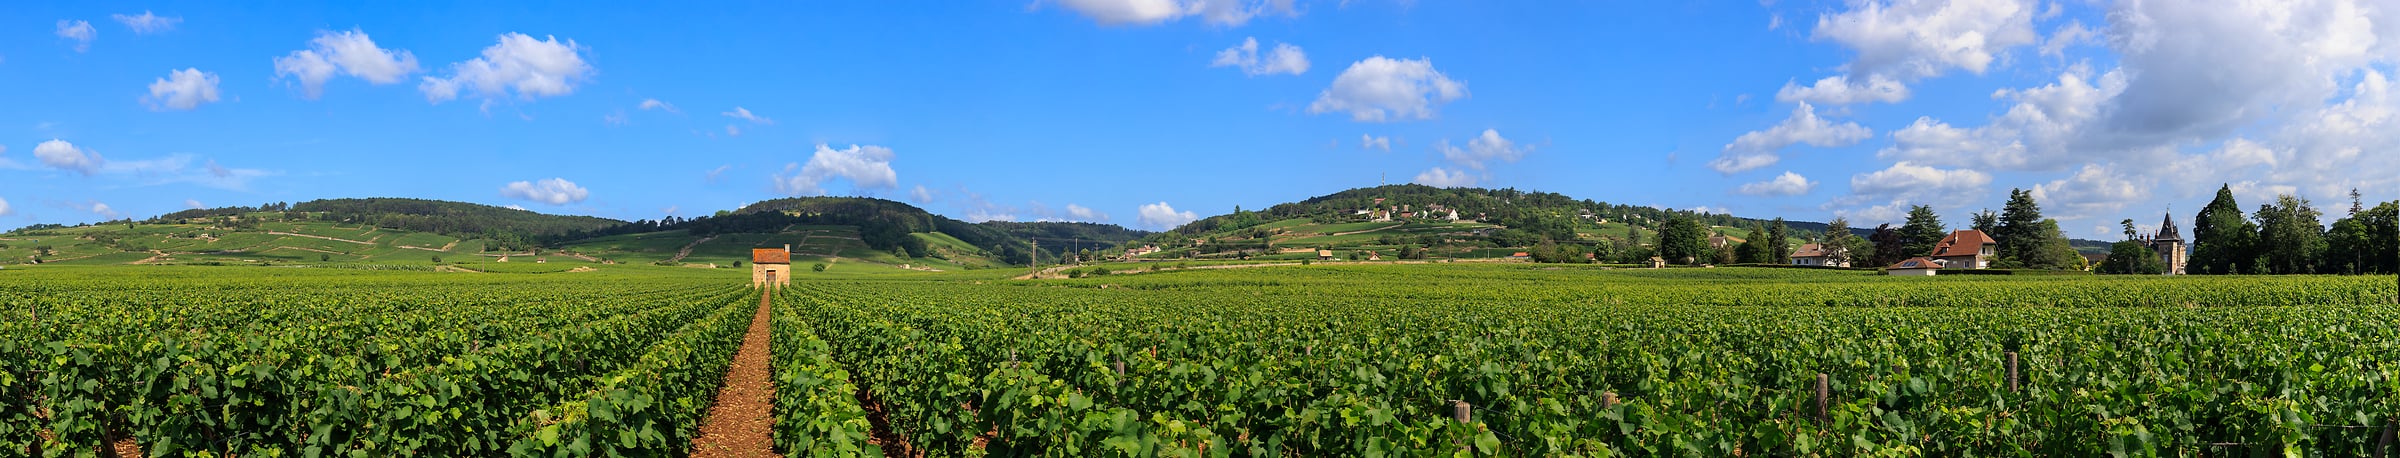 1,684 megapixels! A very high resolution, large-format panorama photo print of a vineyard in France; photograph created by Scott Dimond in Belissand Beaune Premier Cru, Beaune, Côte-d'Or, France.